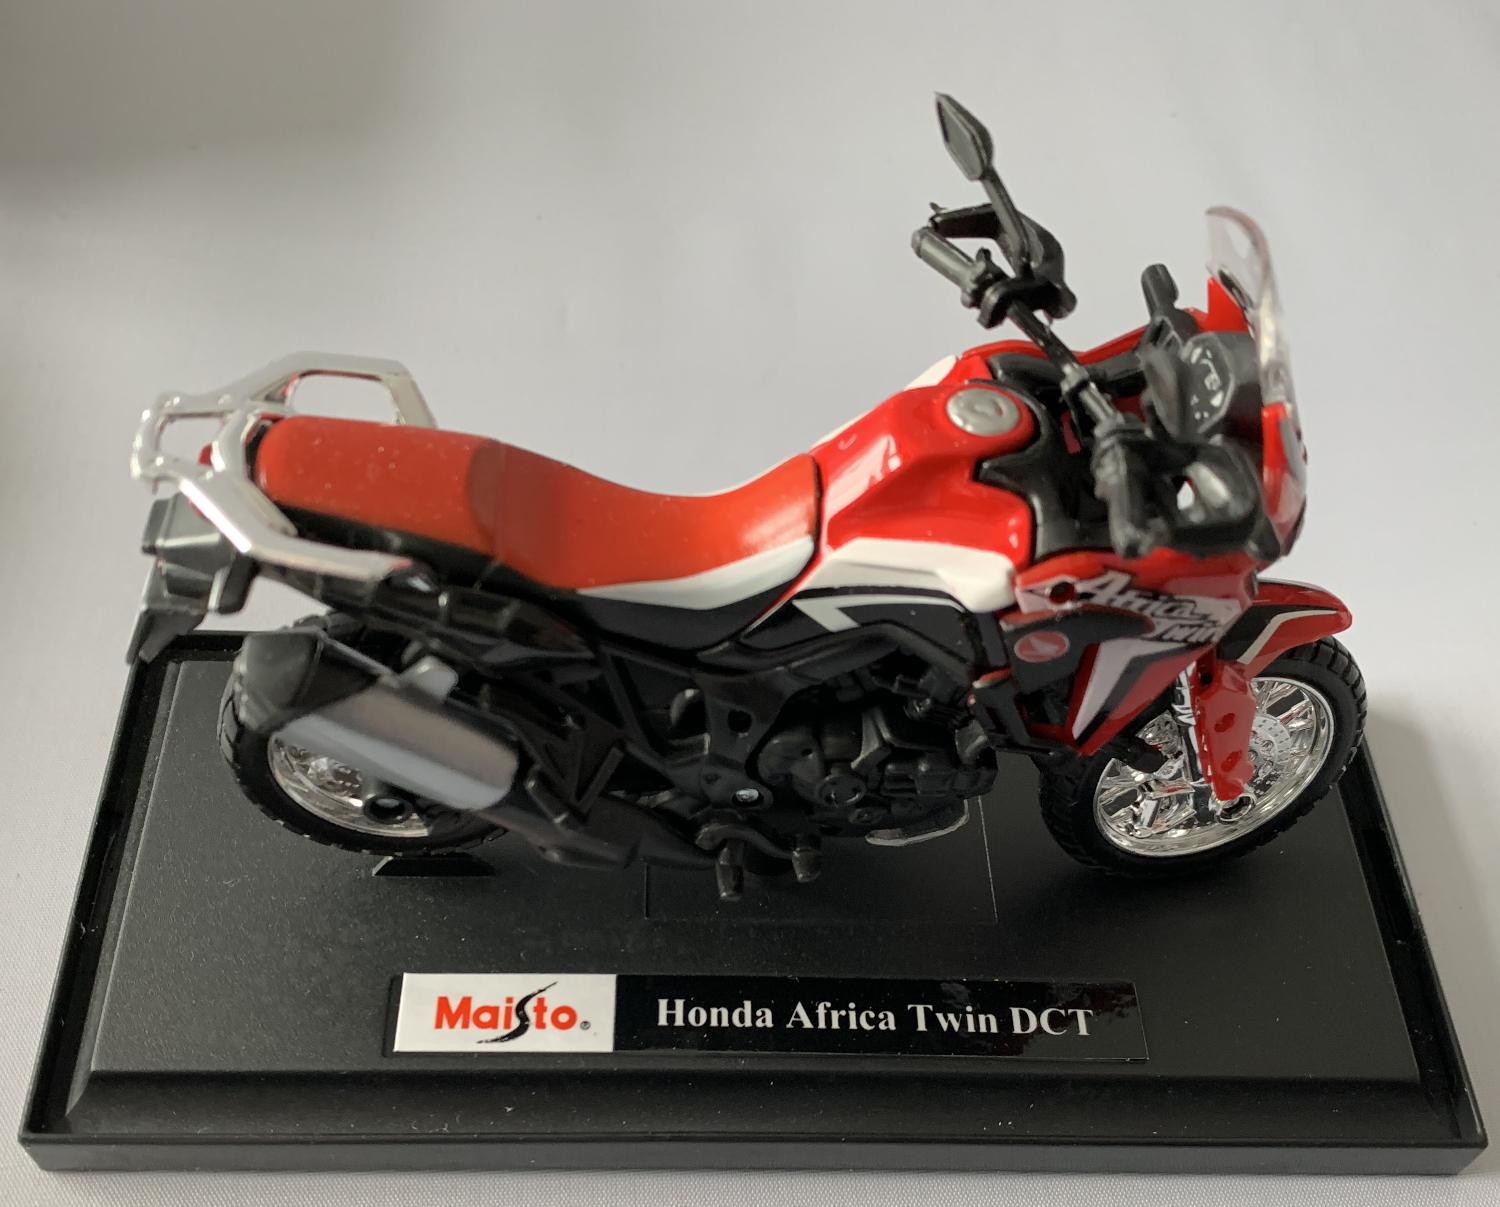 Honda Africa Twin DCT in red / black / white 1:18 scale model from Maisto